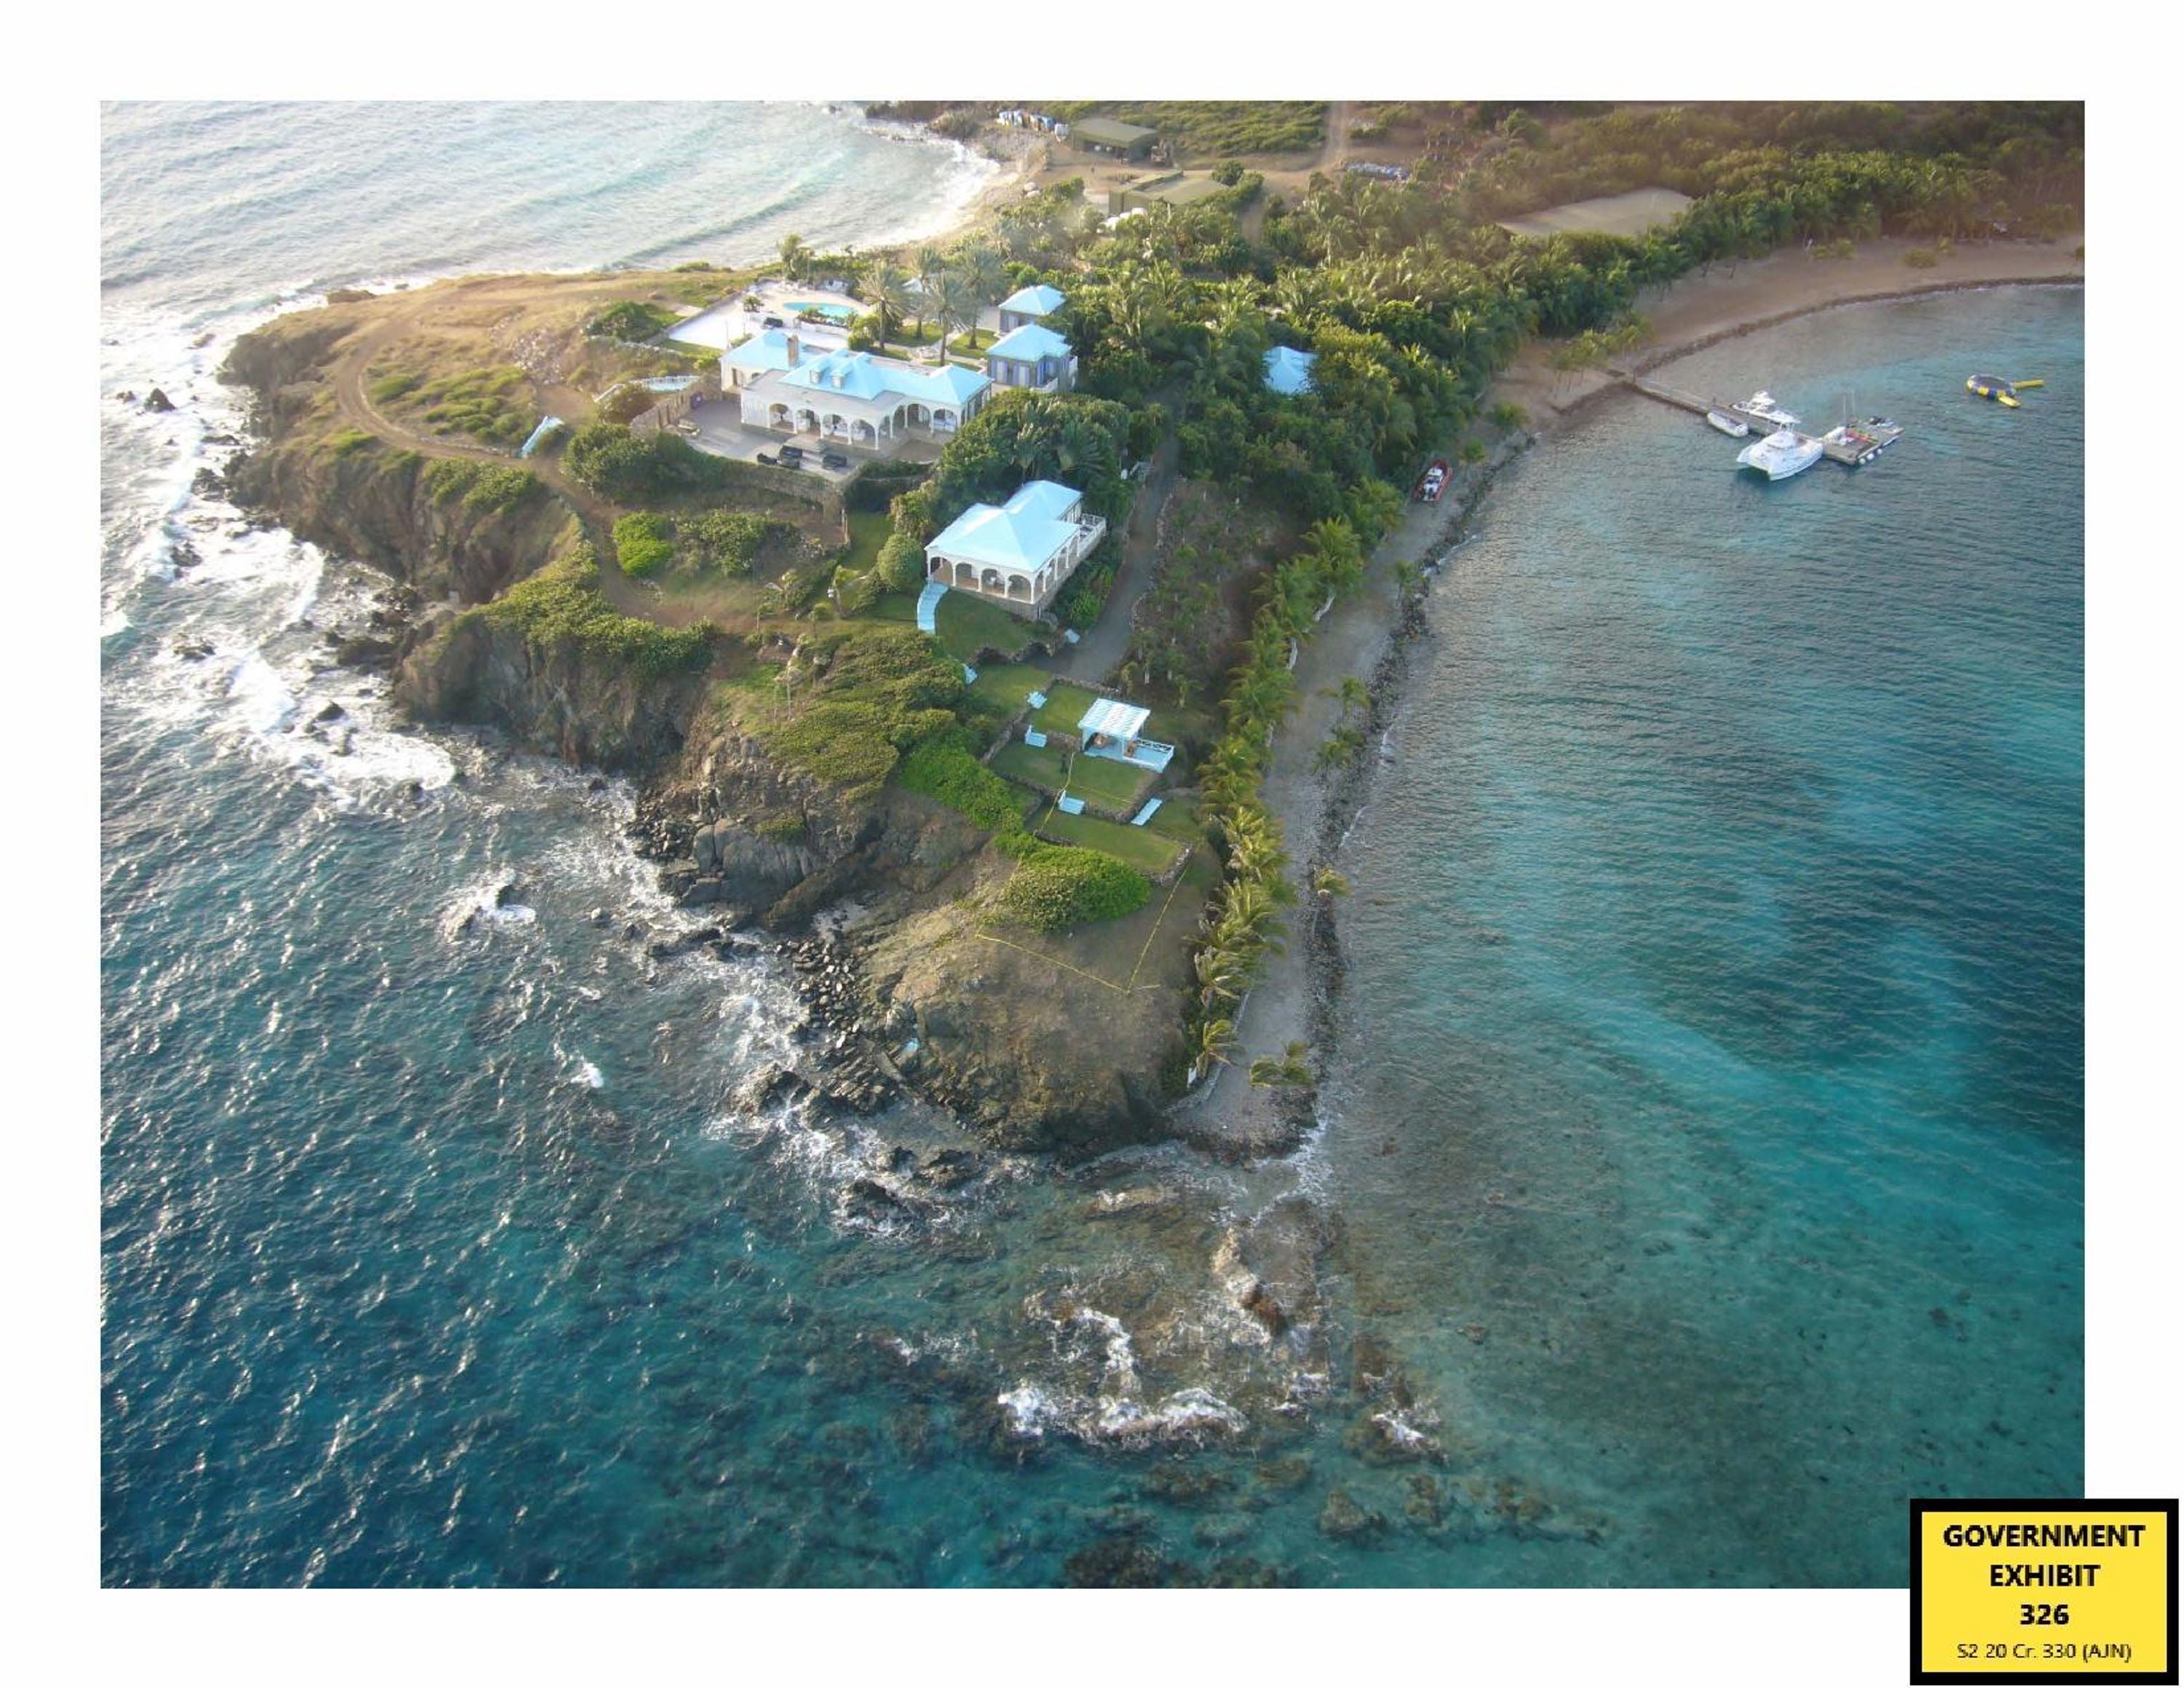 An aerial view of Epstein’s private island